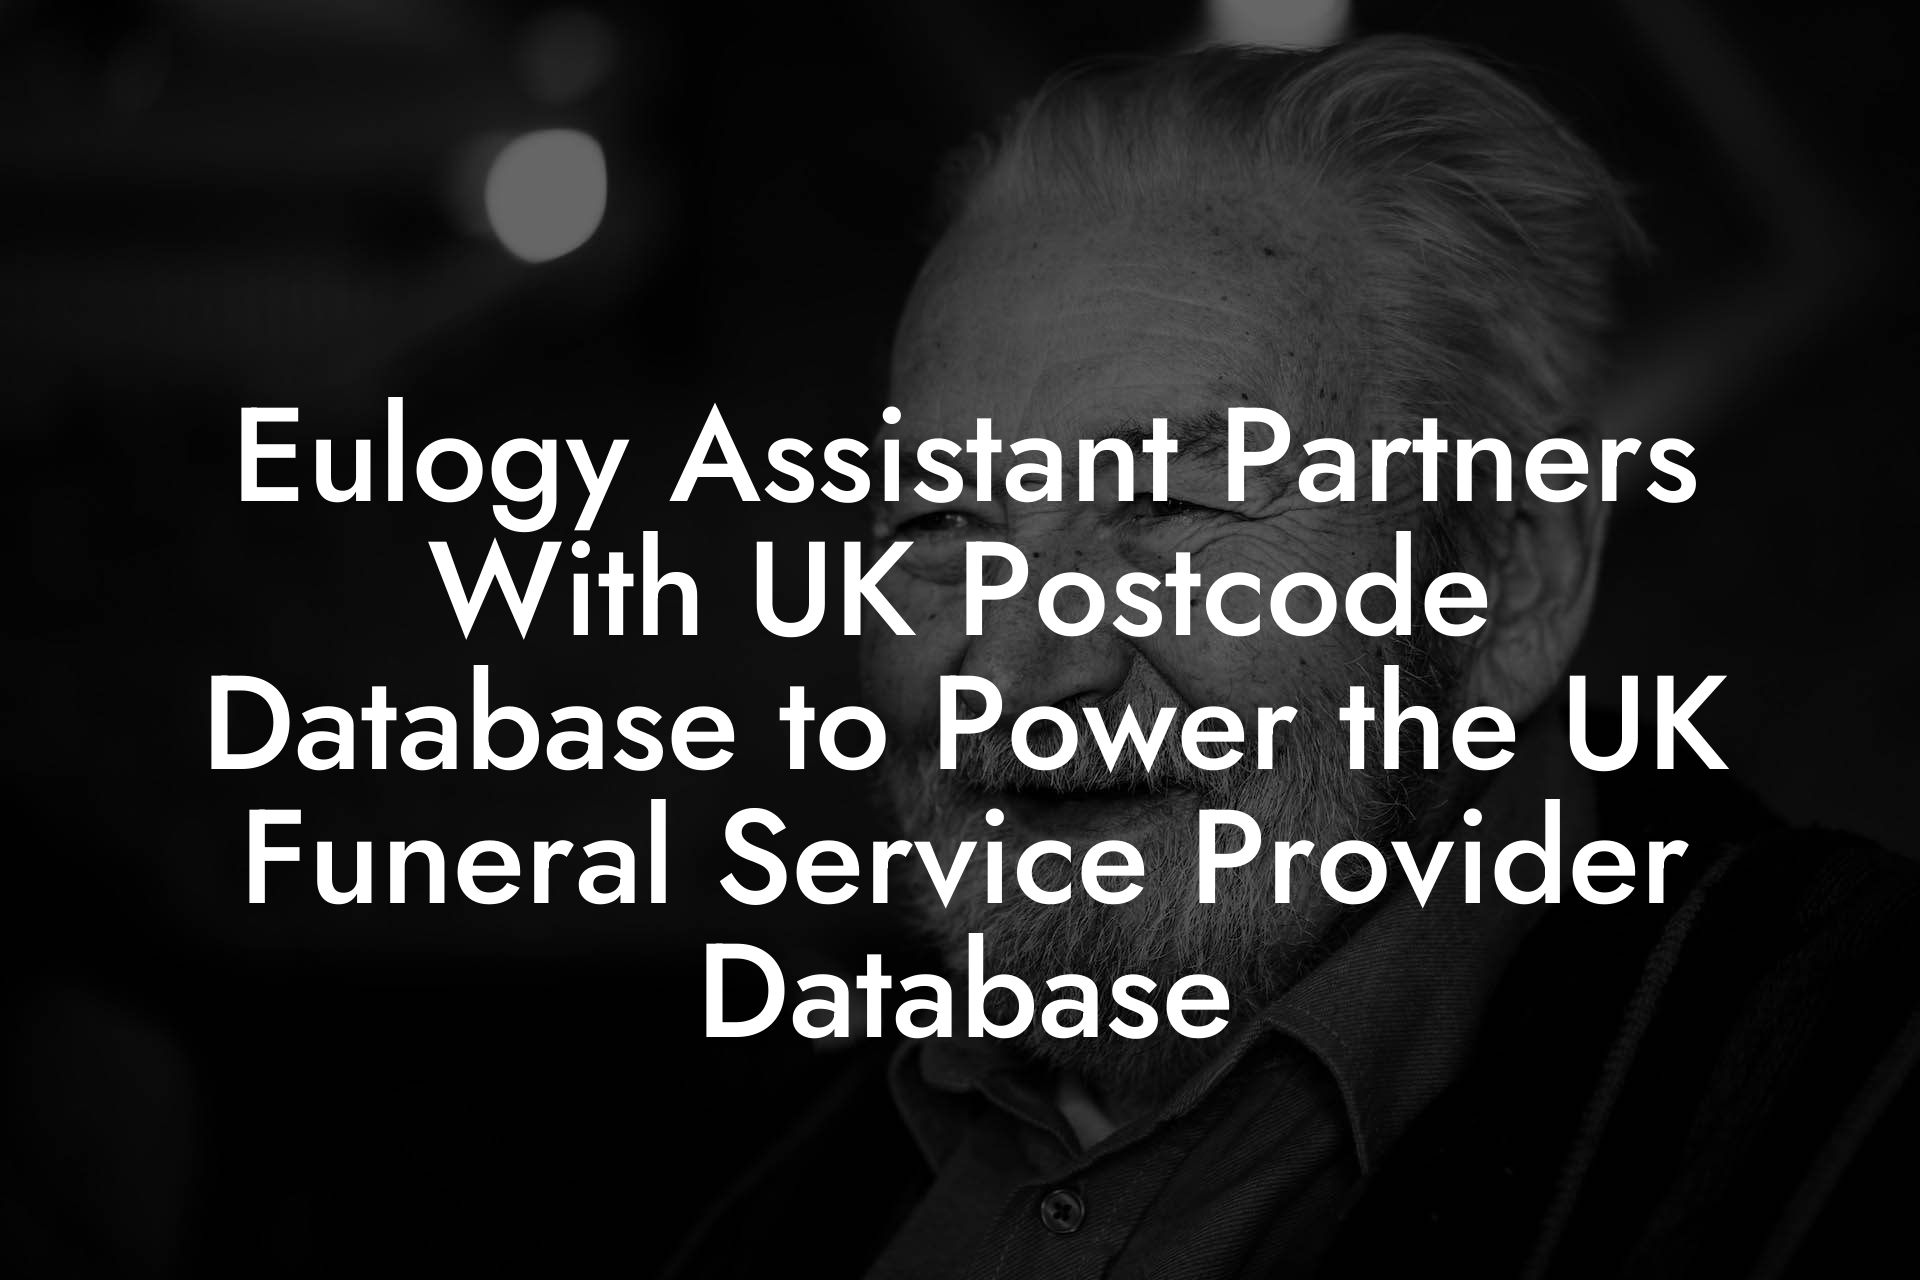 Eulogy Assistant Partners With UK Postcode Database to Power the UK Funeral Service Provider Database